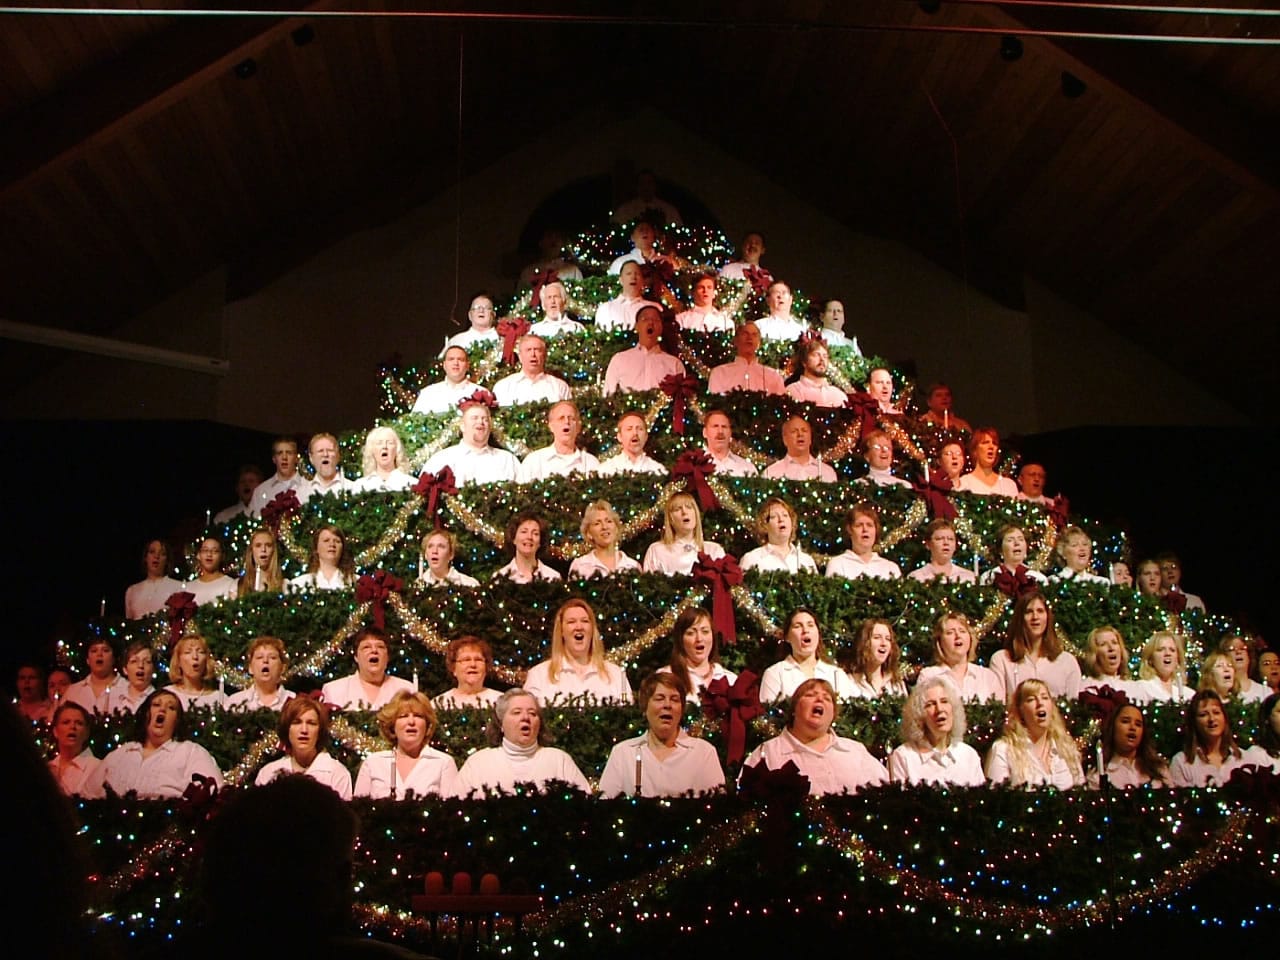 Choir members are nestled in the constructed tree like ornaments for the annual Singing Christmas Tree performances at the Ridgefield Church of the Nazarene.